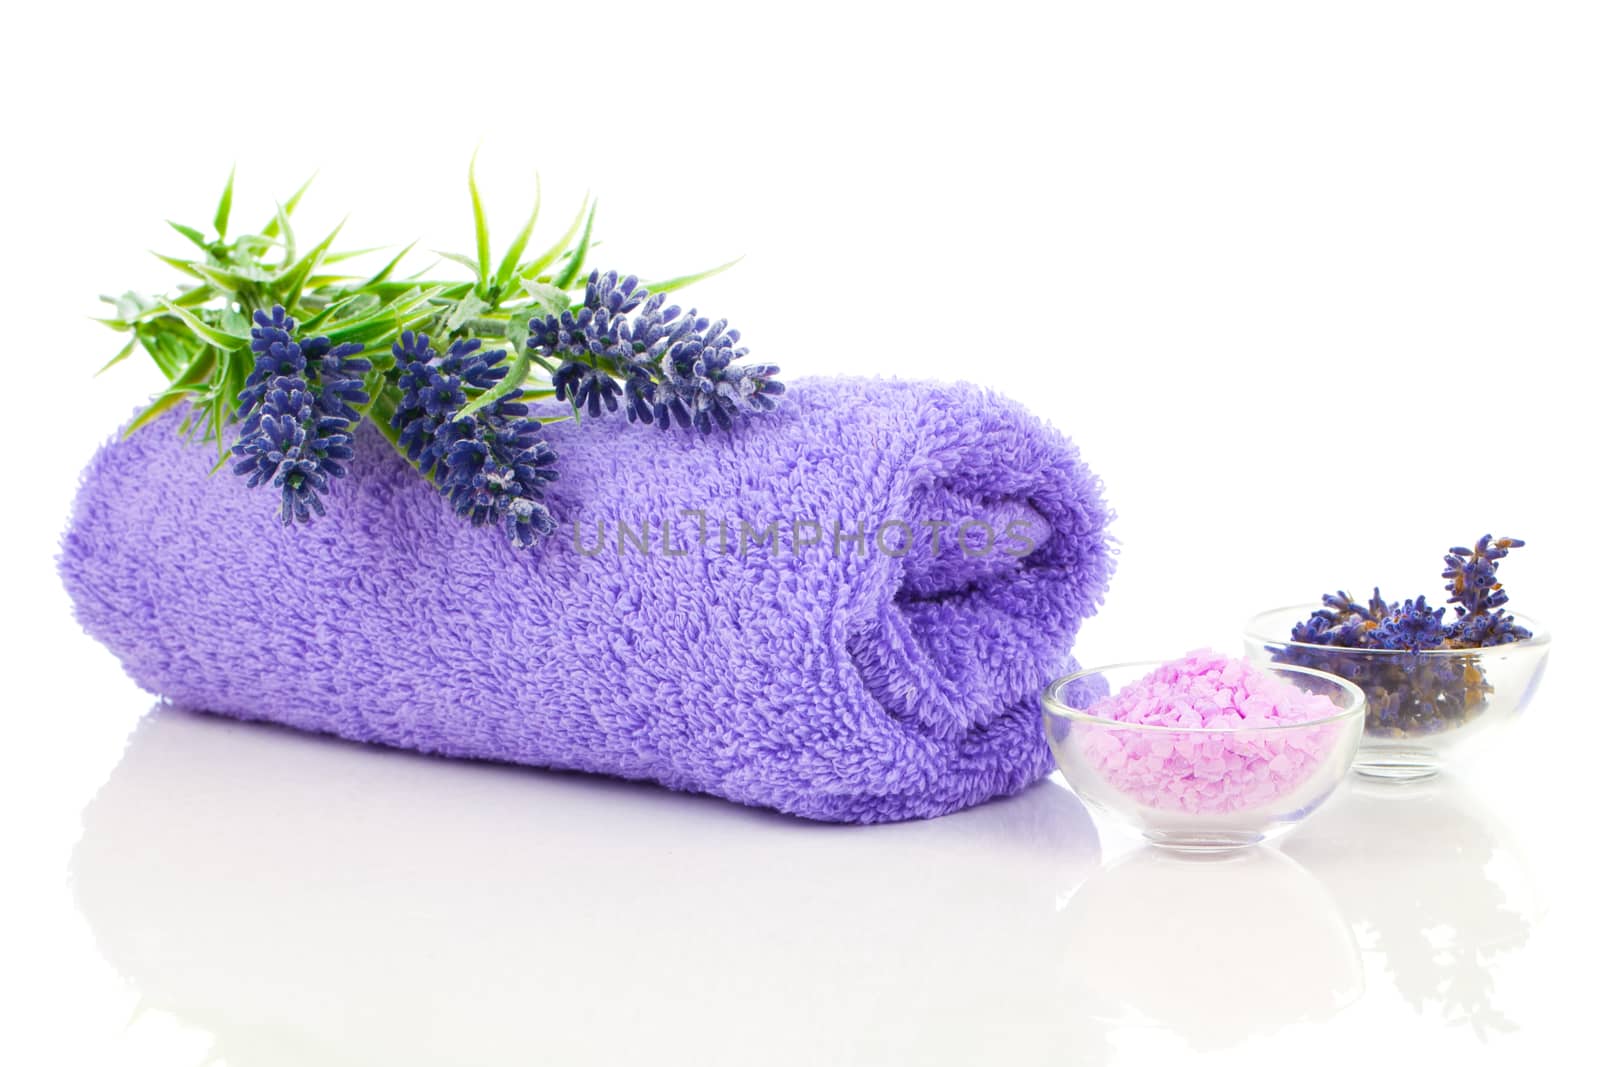 Colorful towel with lavender flower and aromatic bath salt. Isolated on white background